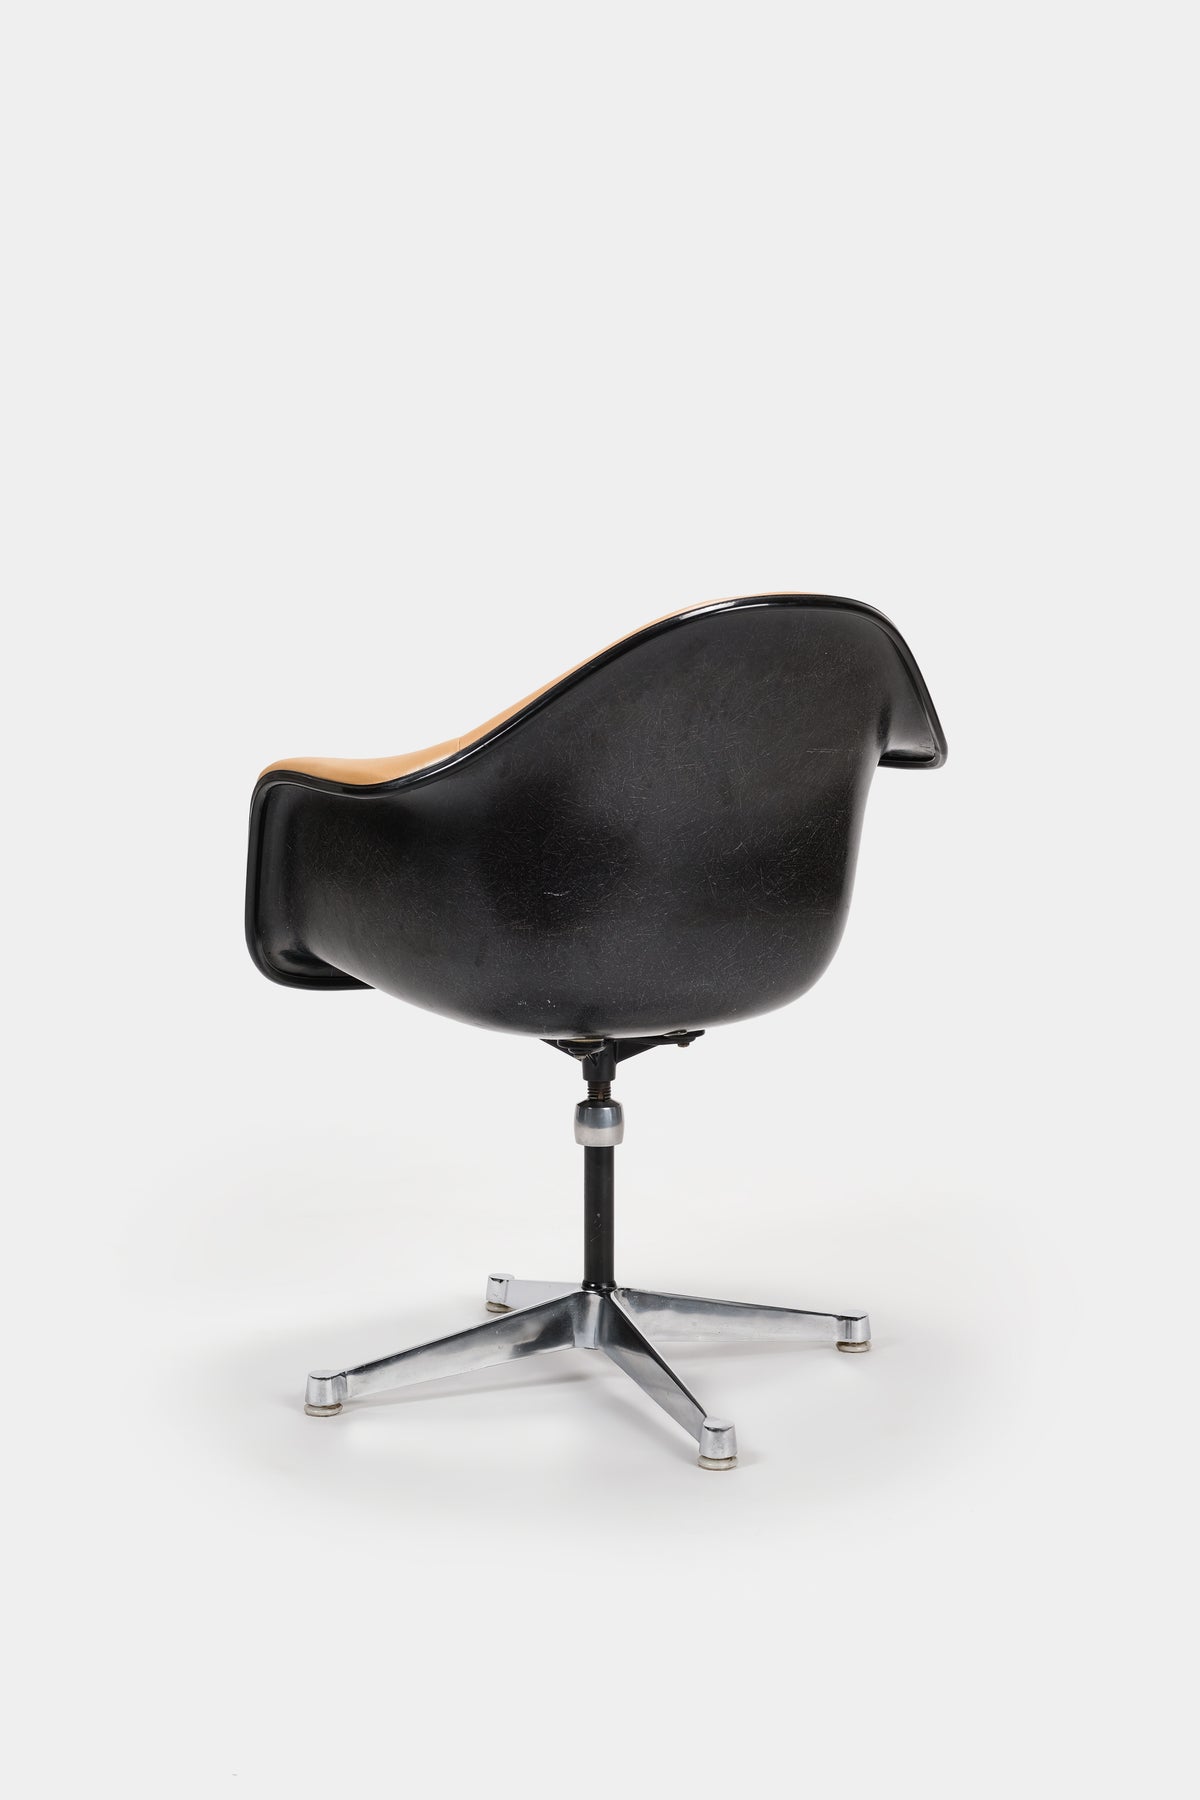 Charles Eames, Office Chair, Rotating, Herman Miller, 70s